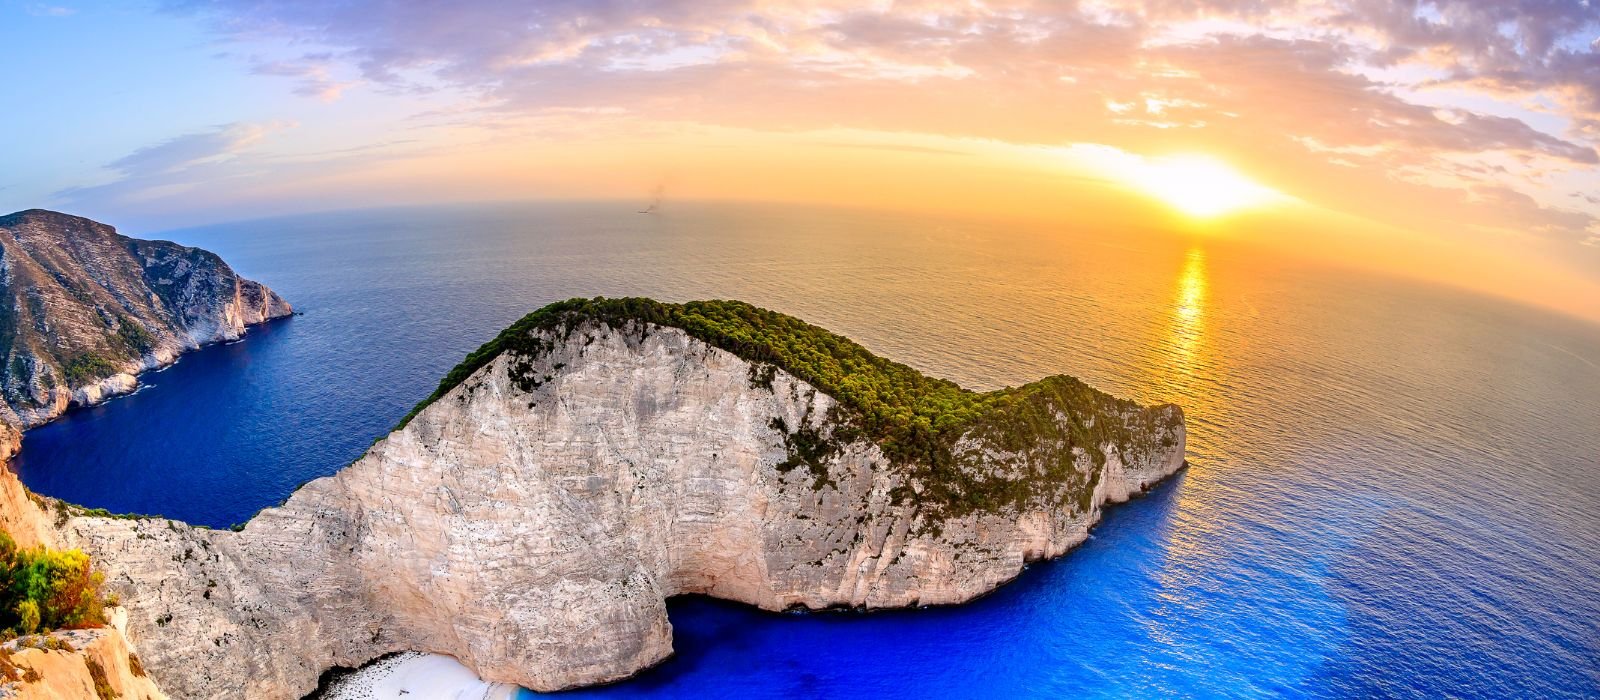 best hotels in zante for lads holiday